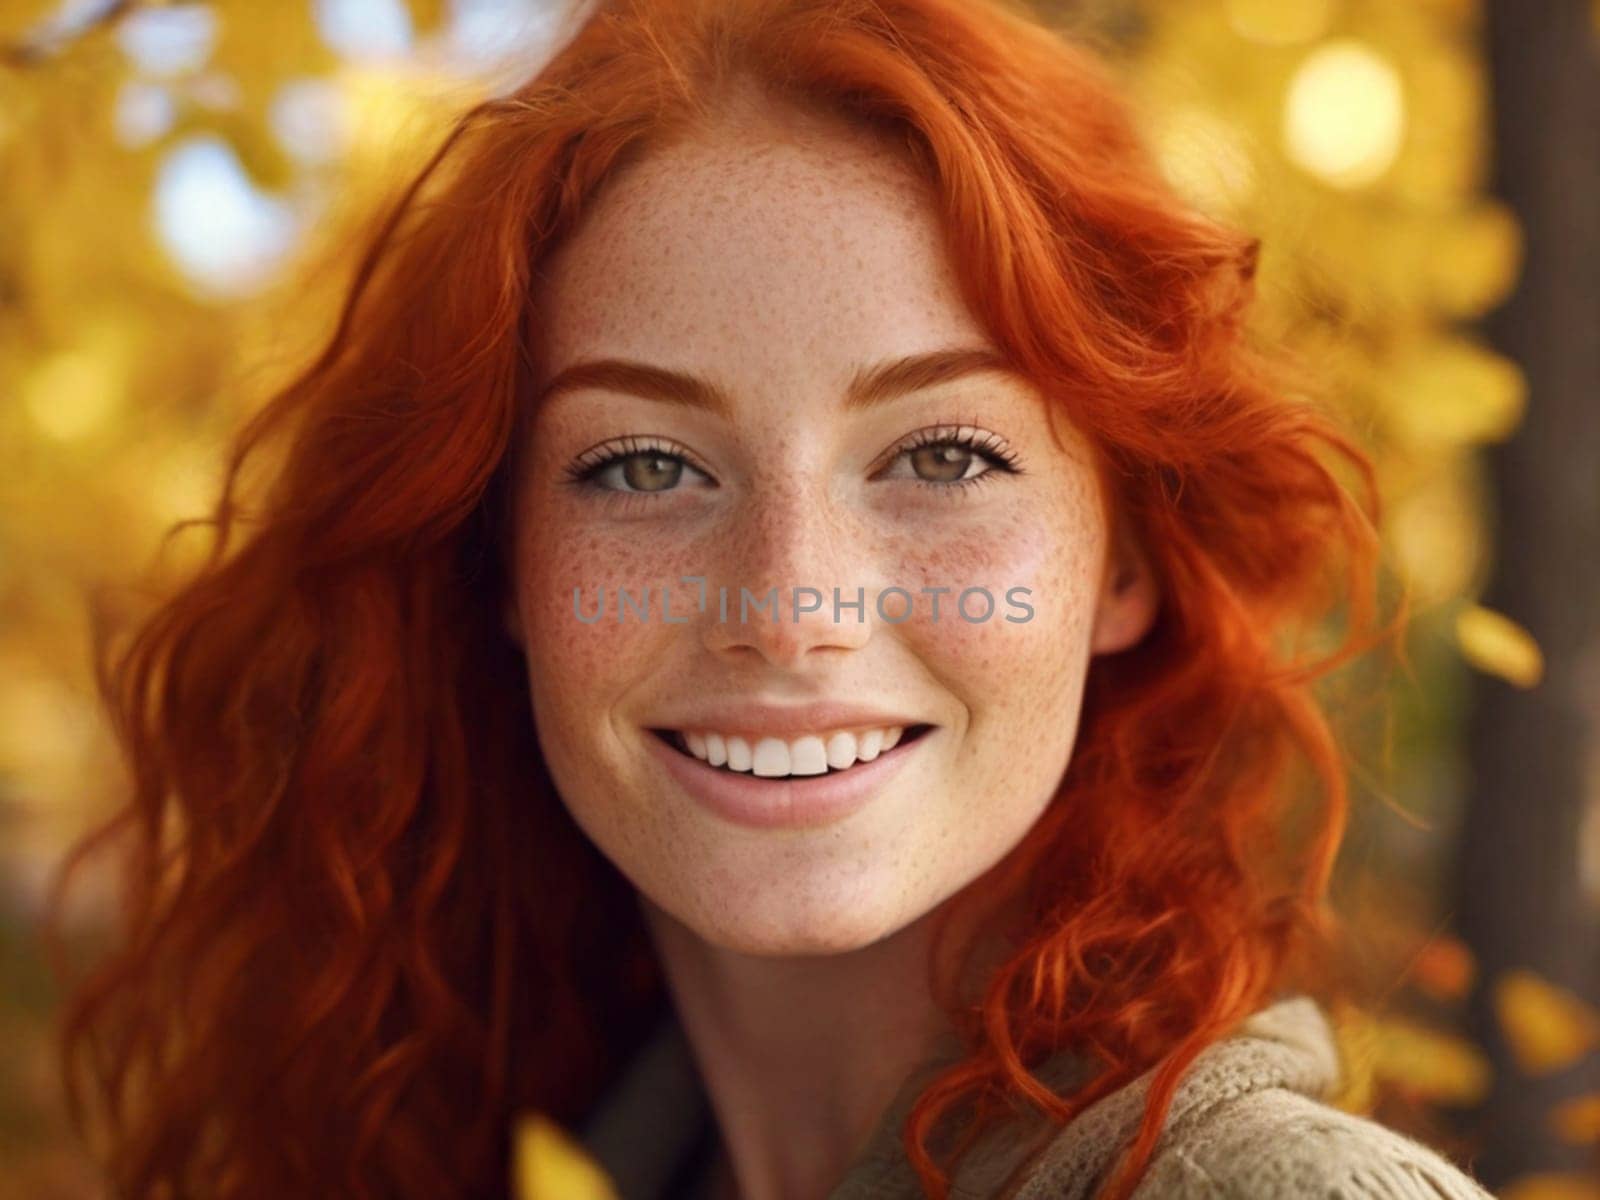 Portrait of a young happy redhead woman with freckles and long wavy hair in an autumn park with yellow foliage